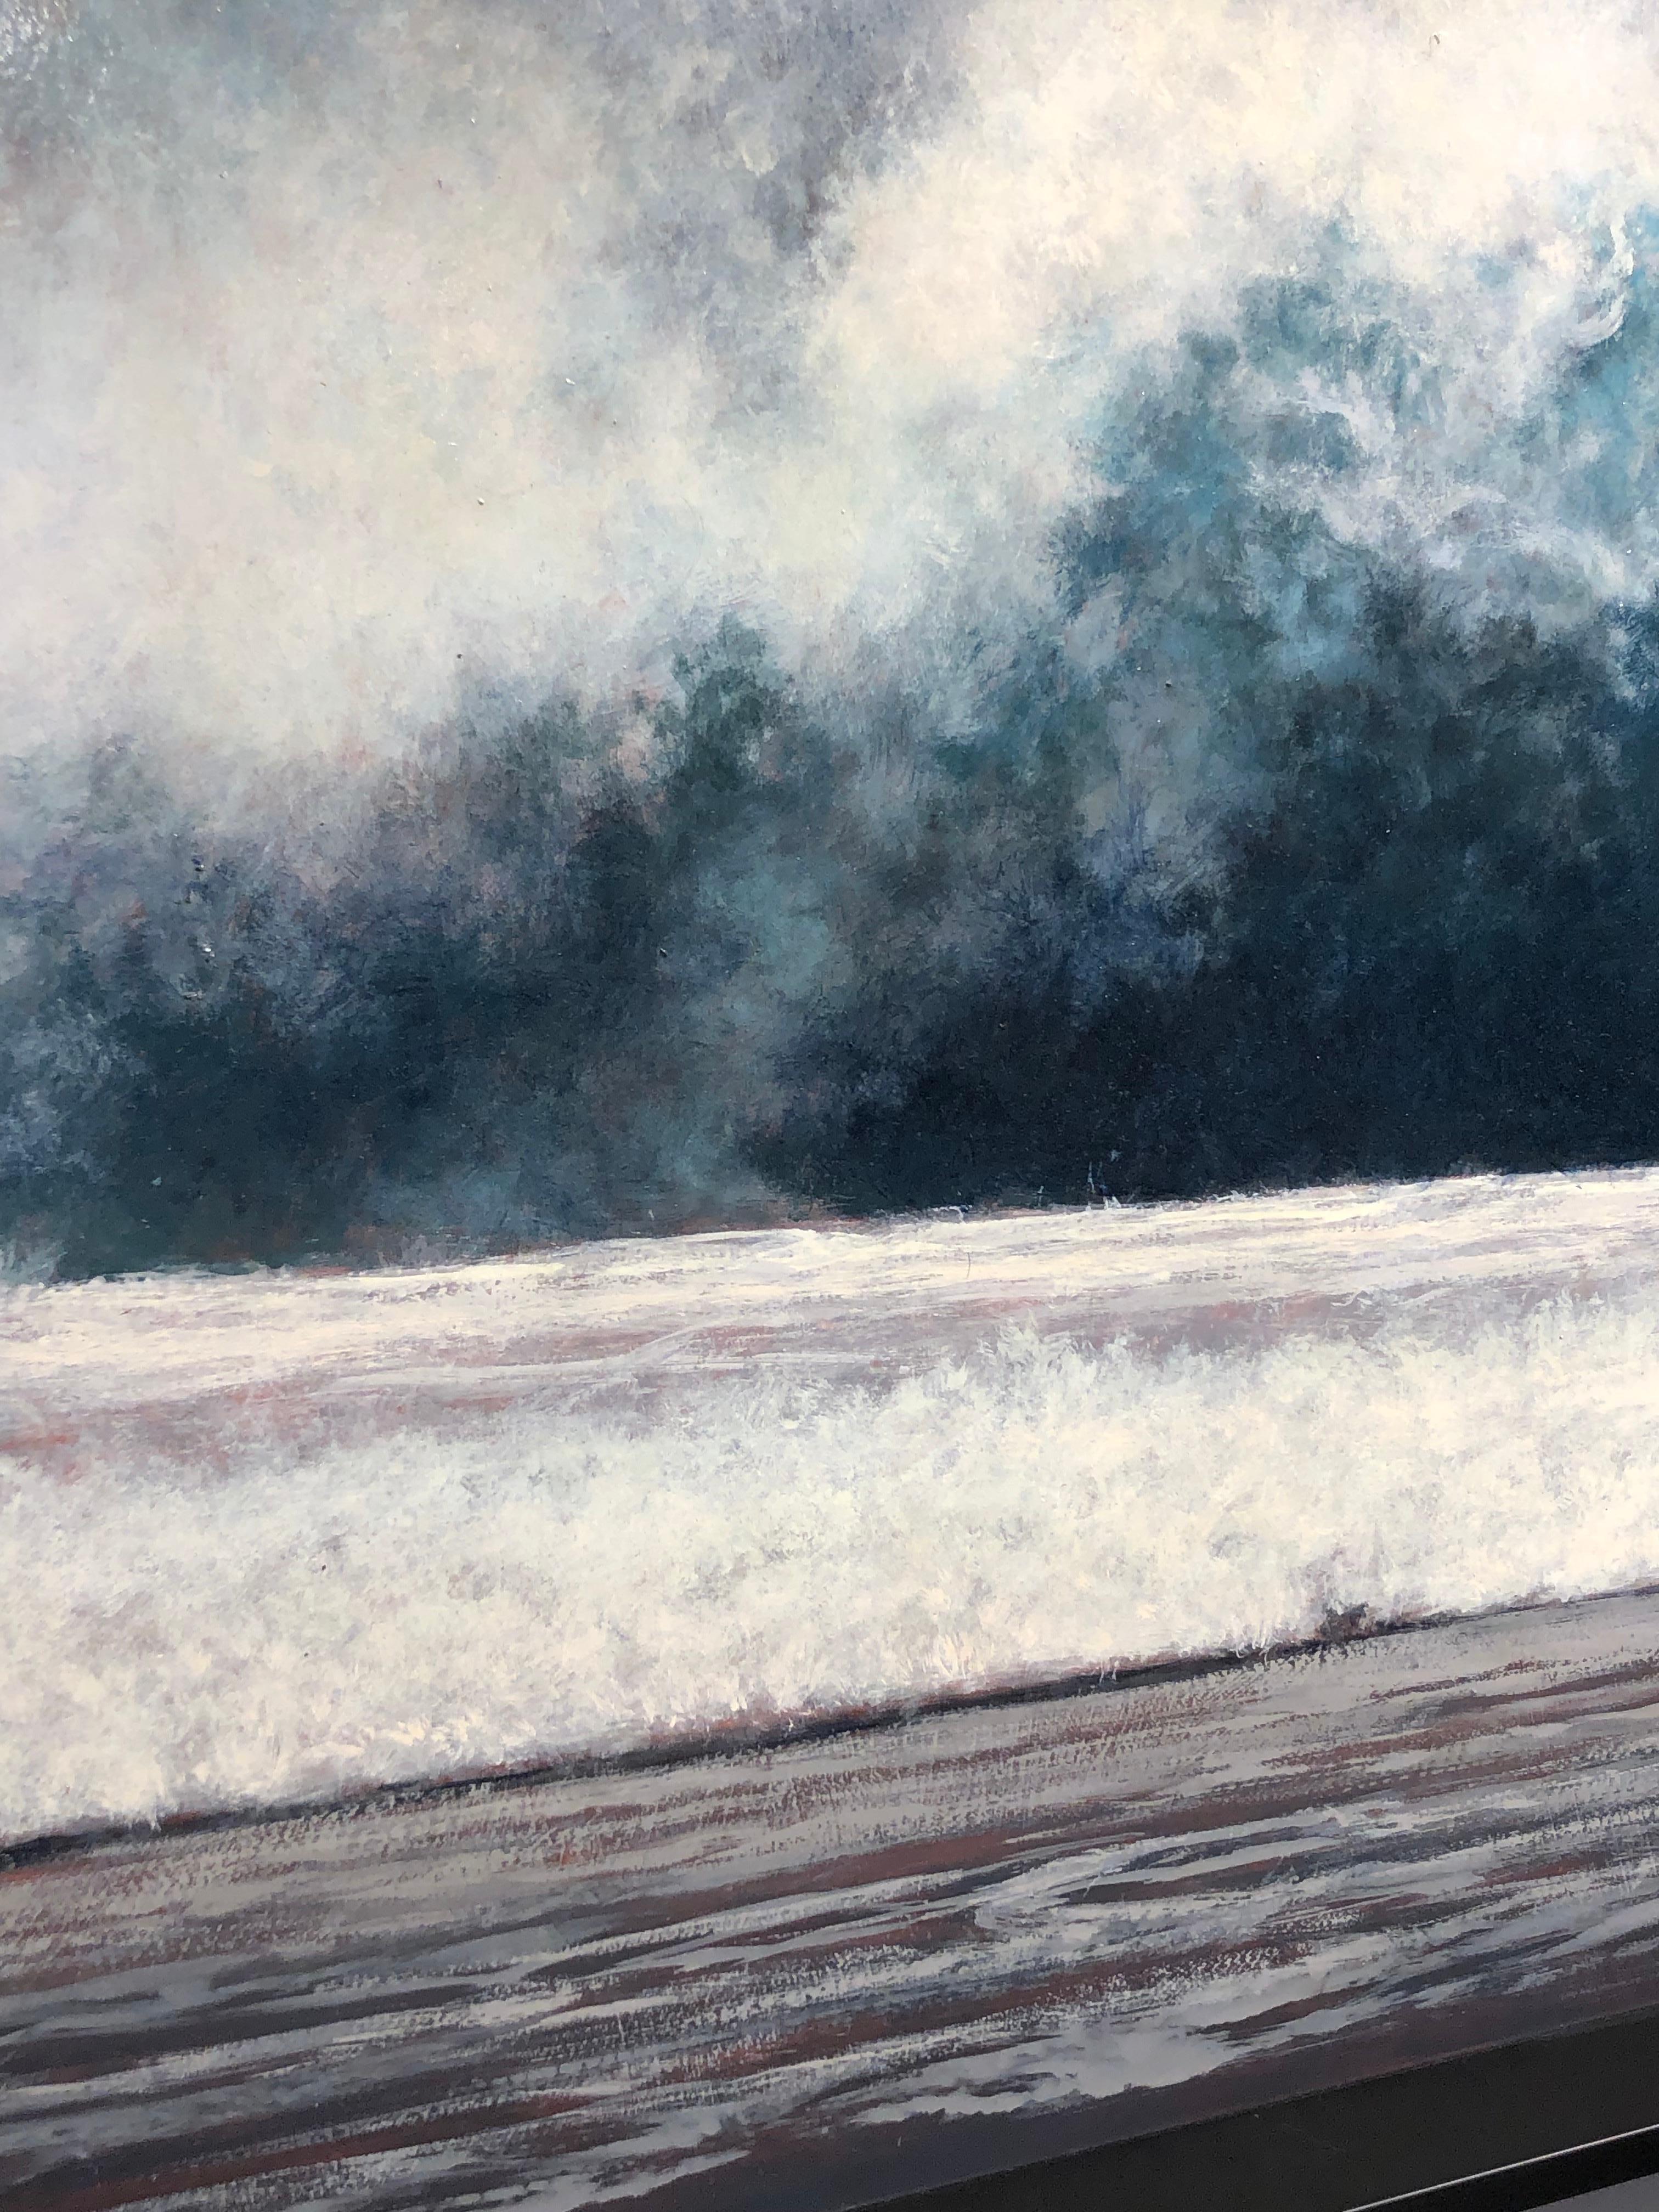 Wave, Kauai - Oil on Panel Painting in Blue Turquoise, White Sea Foam and Gray For Sale 2